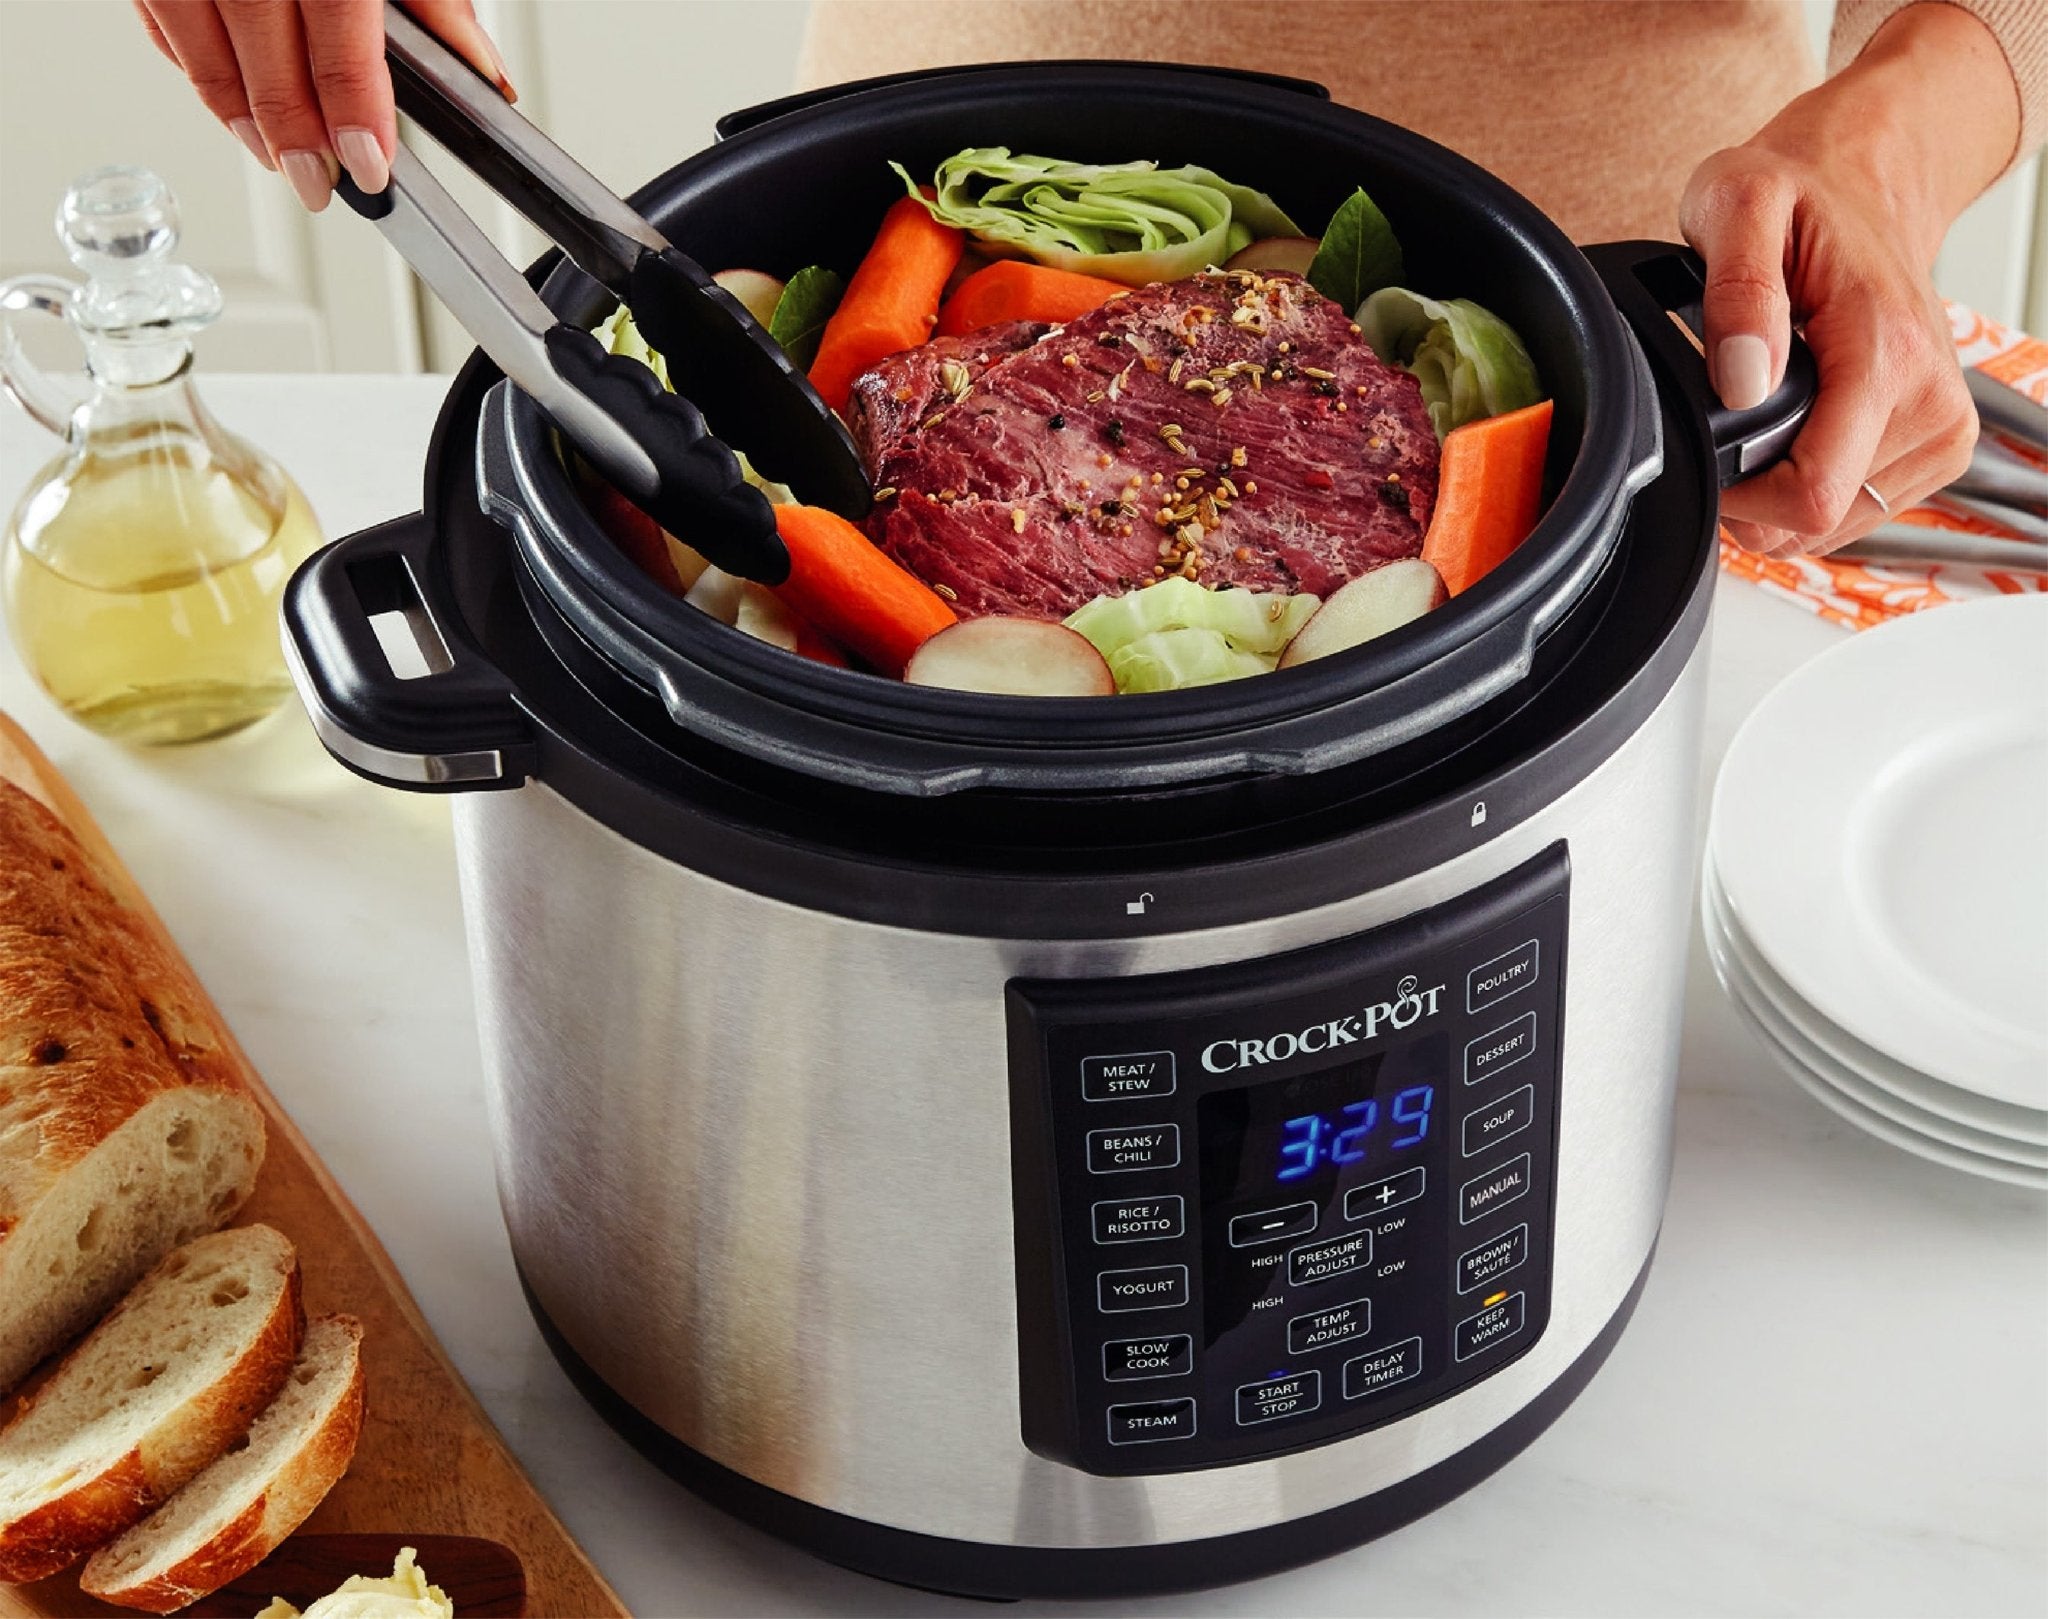 Crockpot Express, 5.6 L, Multi-cooker, cook up to 70% faster